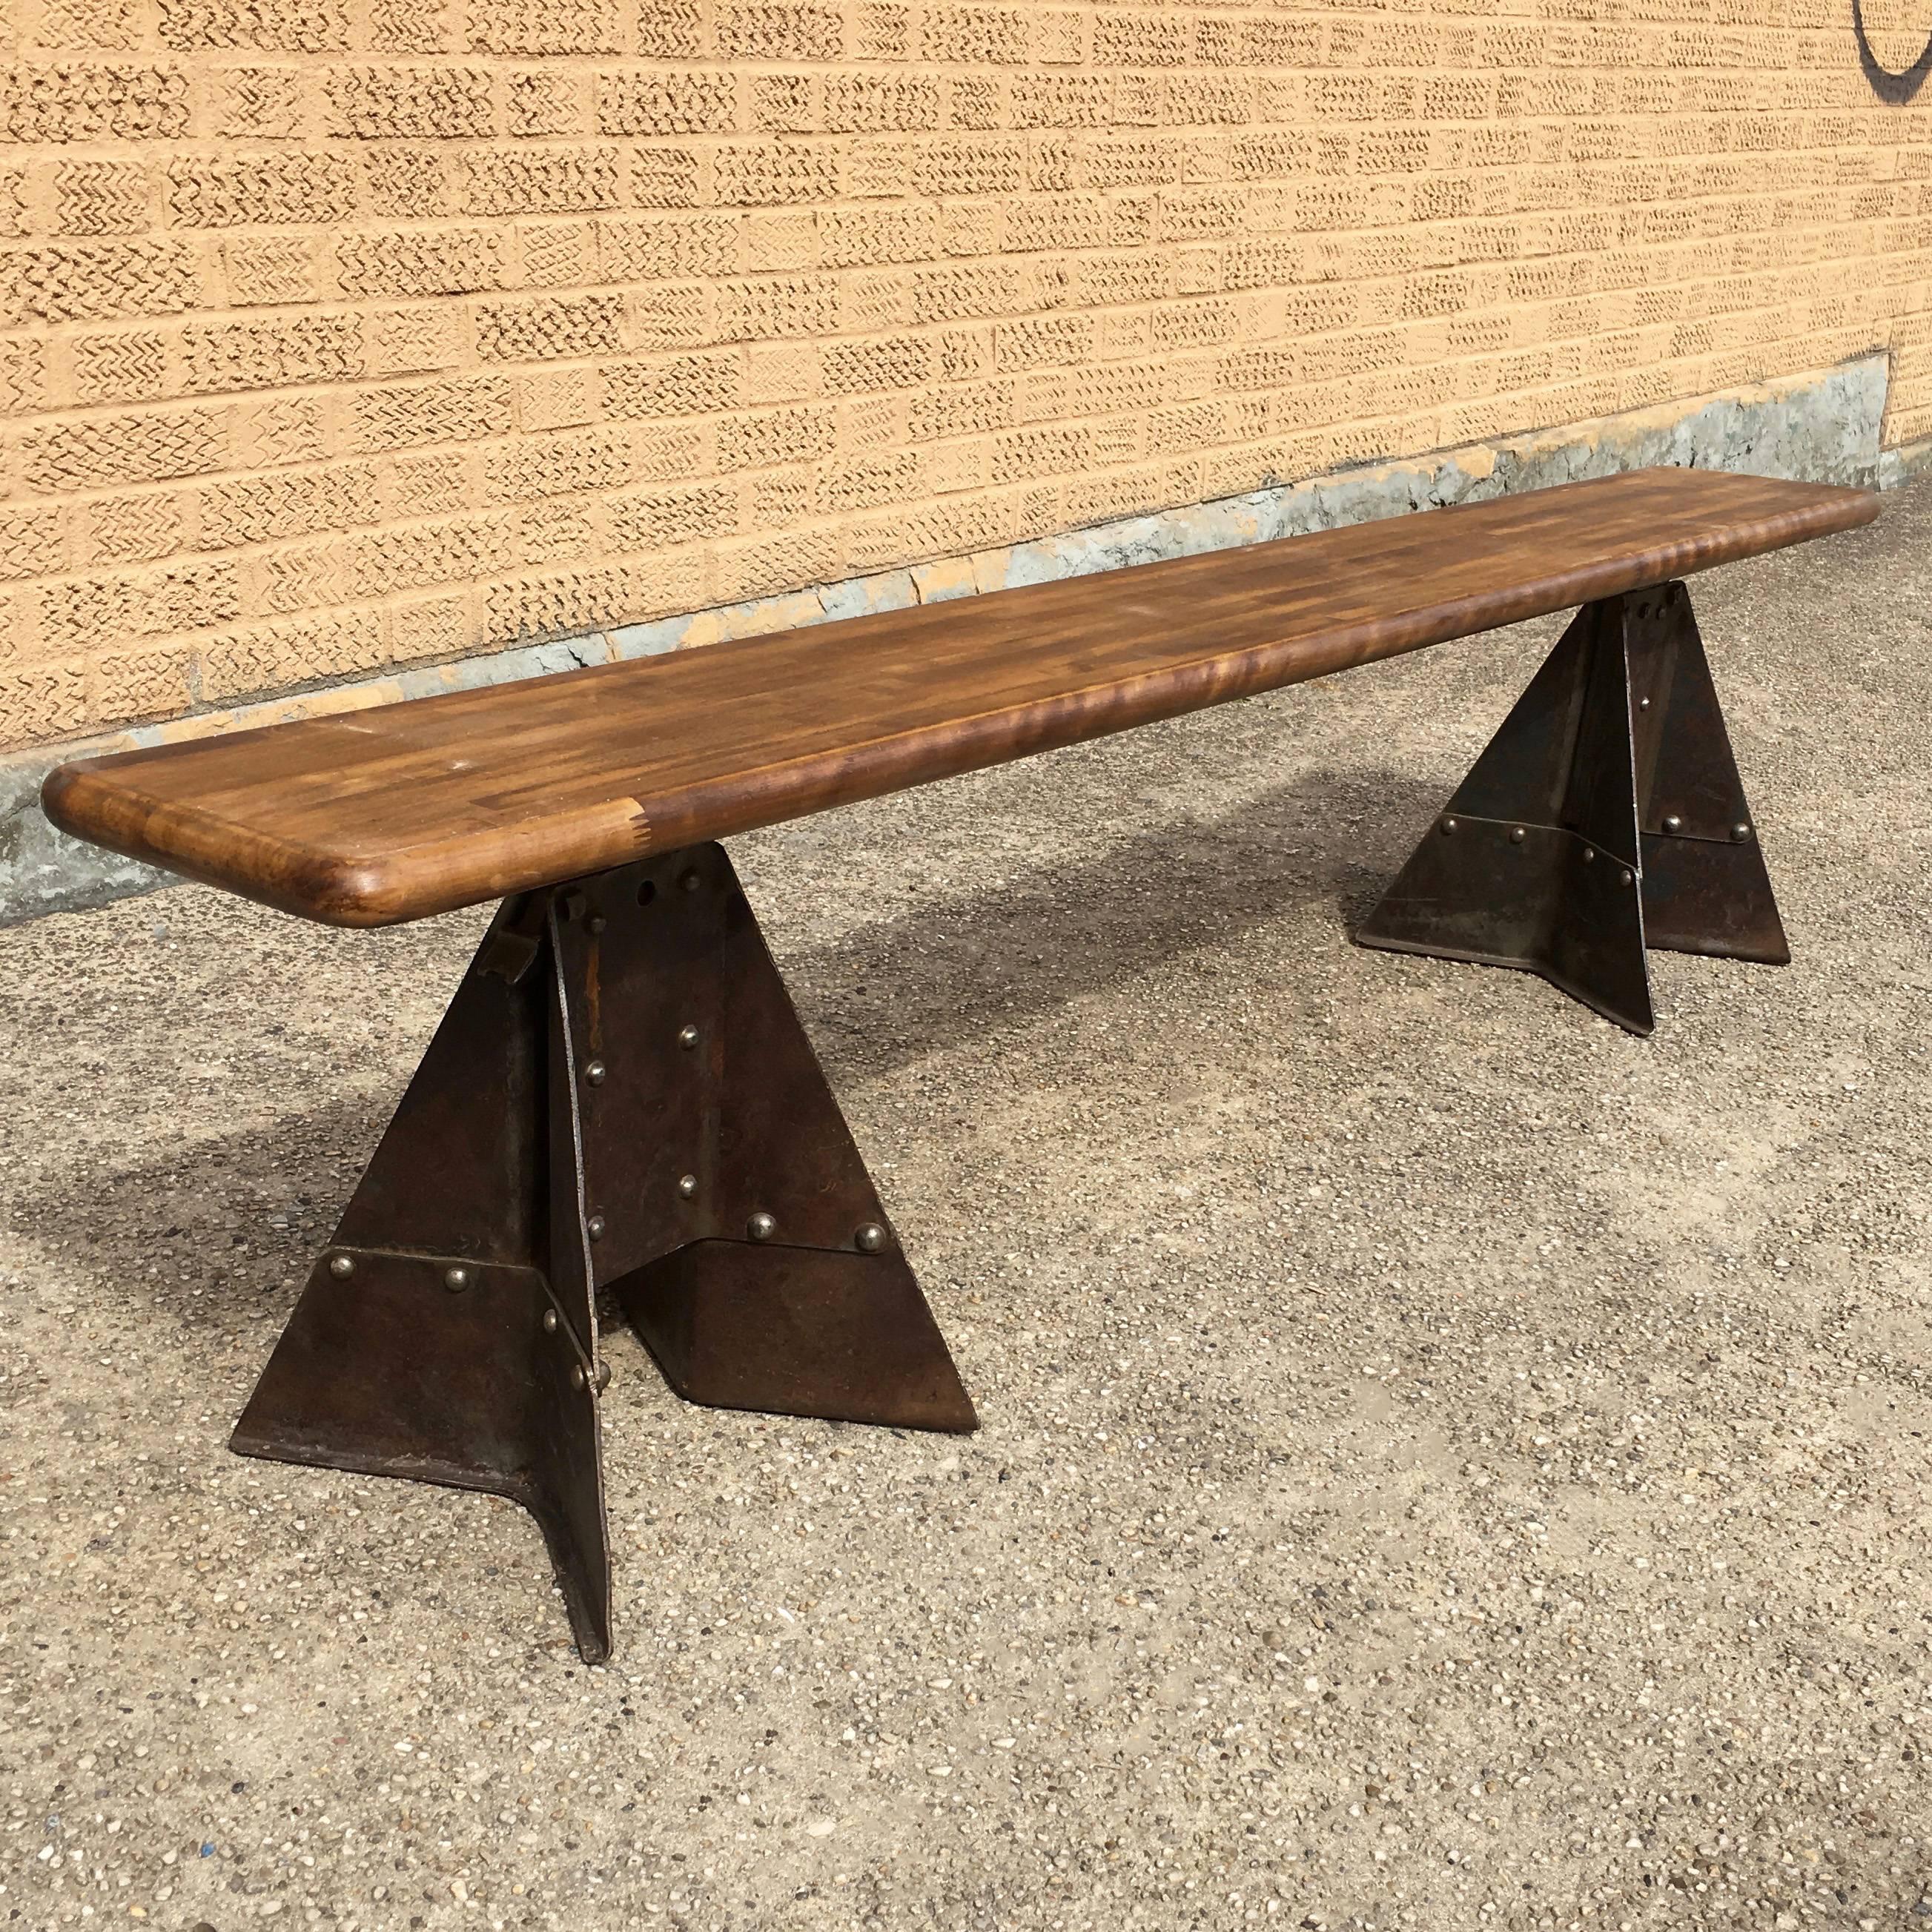 CF Signature, height adjustable, Industrial bench featuring a 9? Deep, reclaimed, segmented, maple butcher block top and vintage, 1940s, riveted, pressed steel, construction bases custom-made in Brooklyn, NY. Height is adjustable from 17 - 23